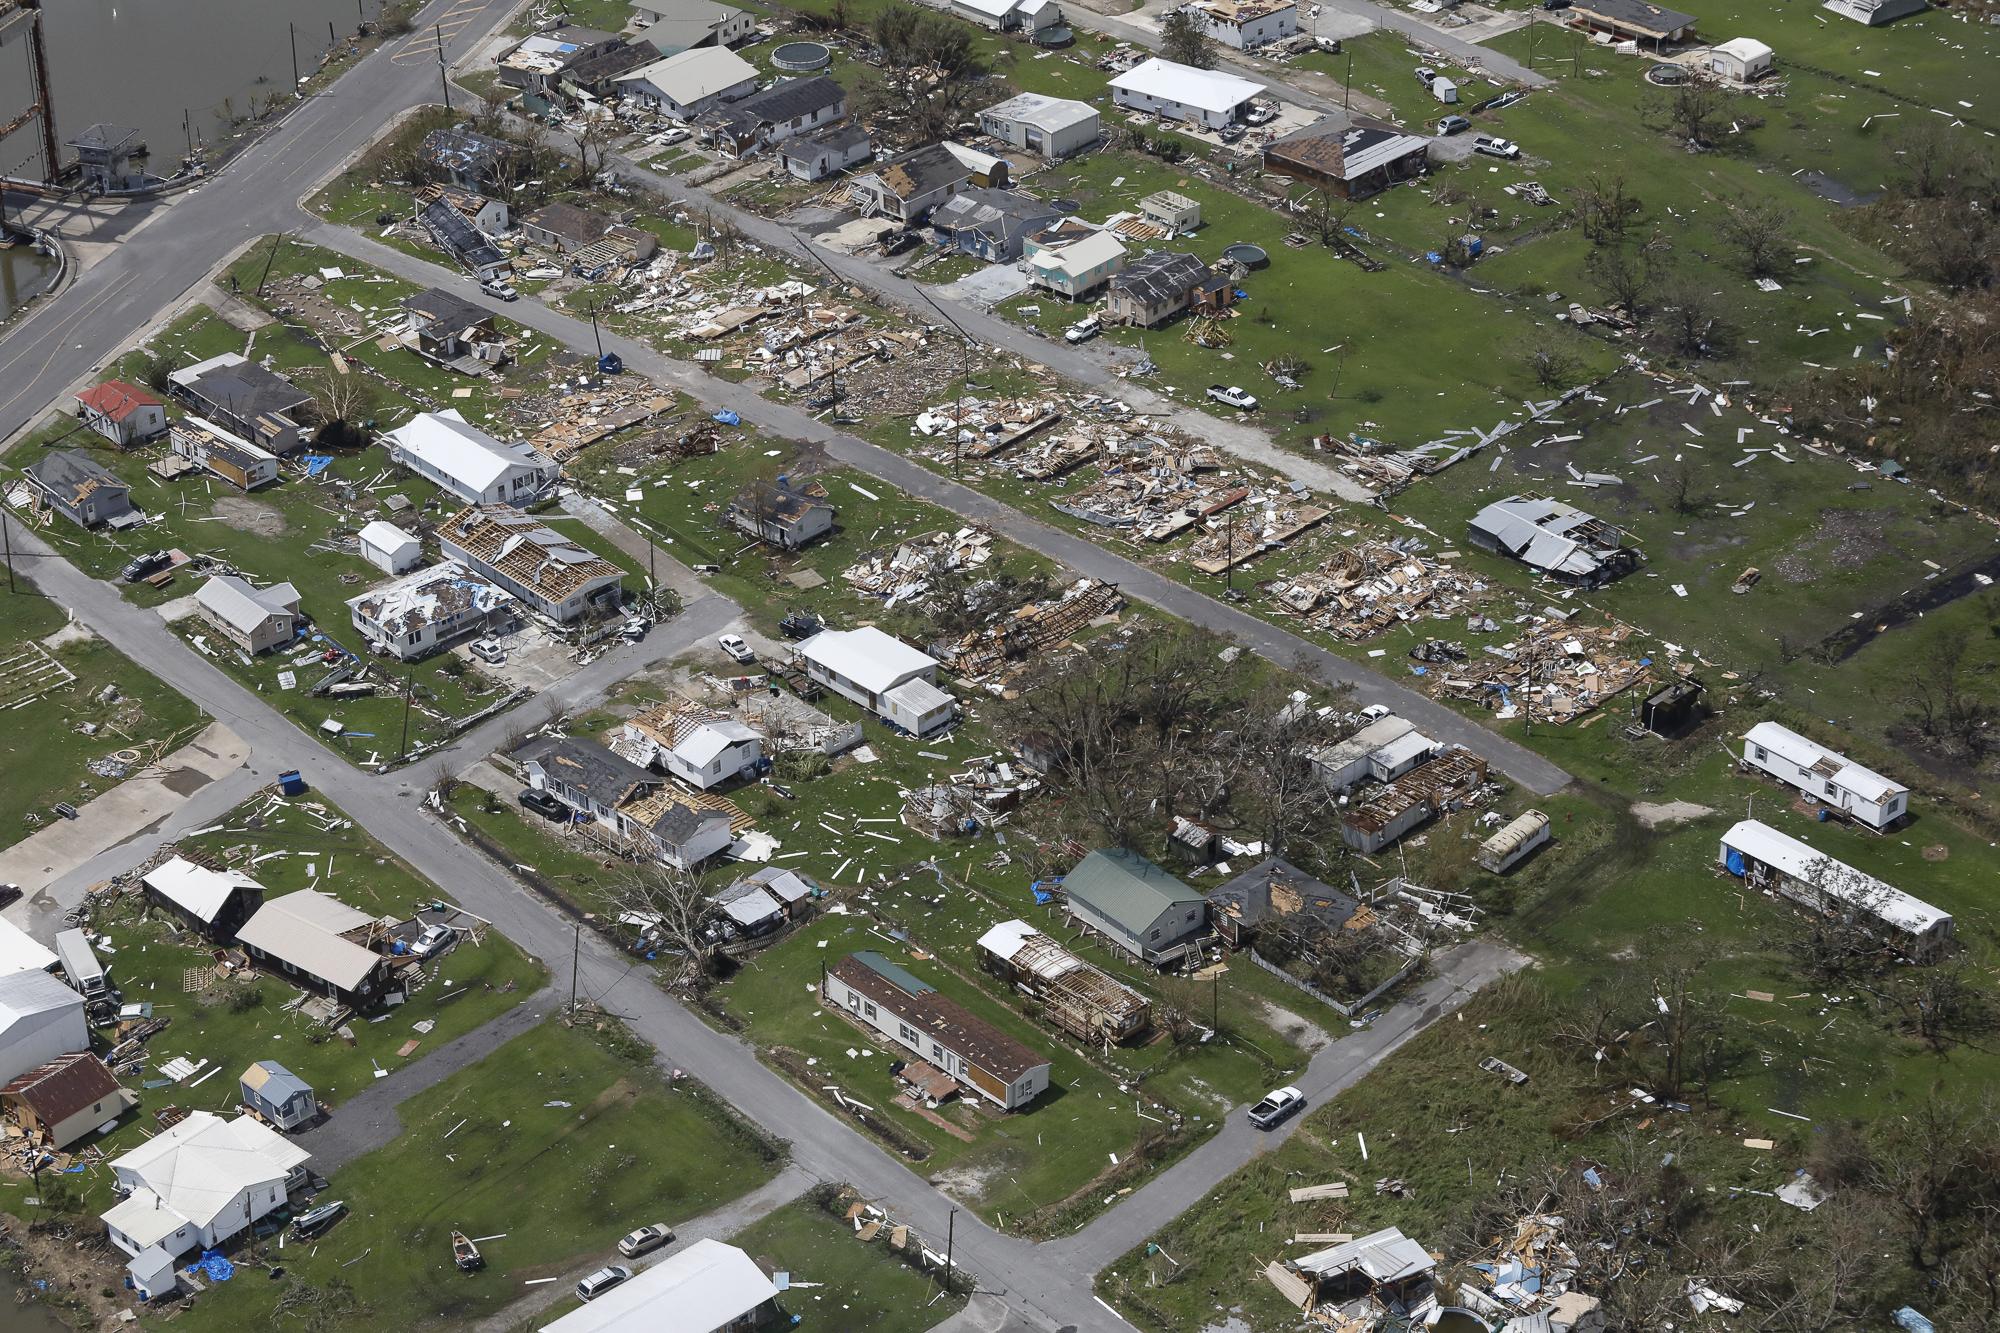 Hurricane Ida in Louisiana - An aerial view shows destroyed houses after Hurricane Ida...